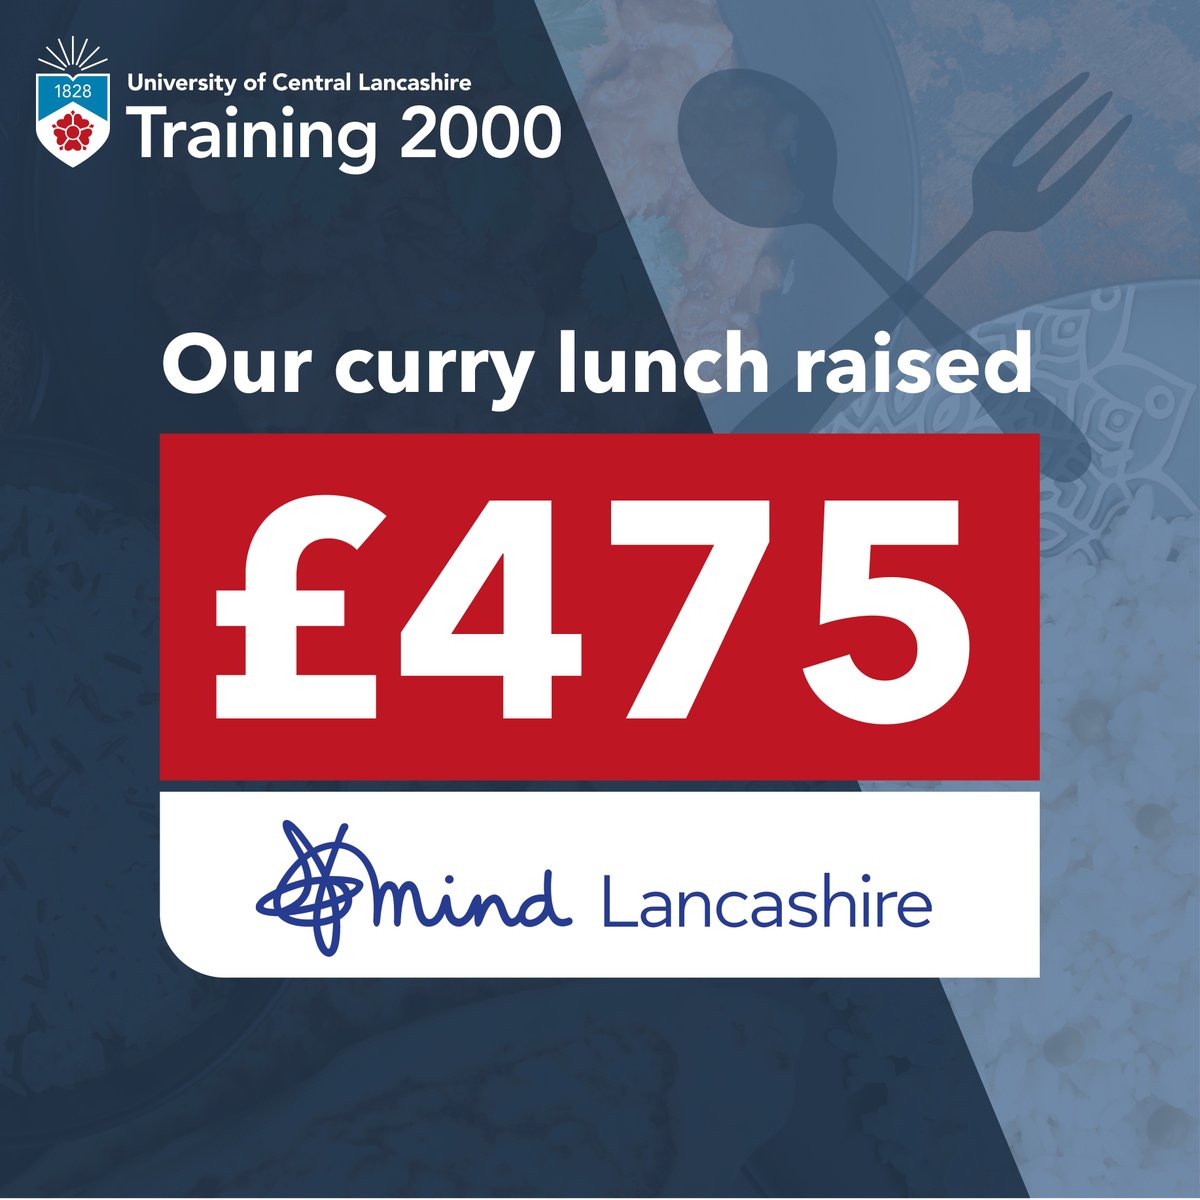 Yesterday it was Training 2000's curry lunch raising money for @LancsMind. The meal, which was generously provided by our colleague, Sameem, has raised £475 for charity! Thank you to Sameem, the Data Coordinator team, and for everyone who took part on the day.